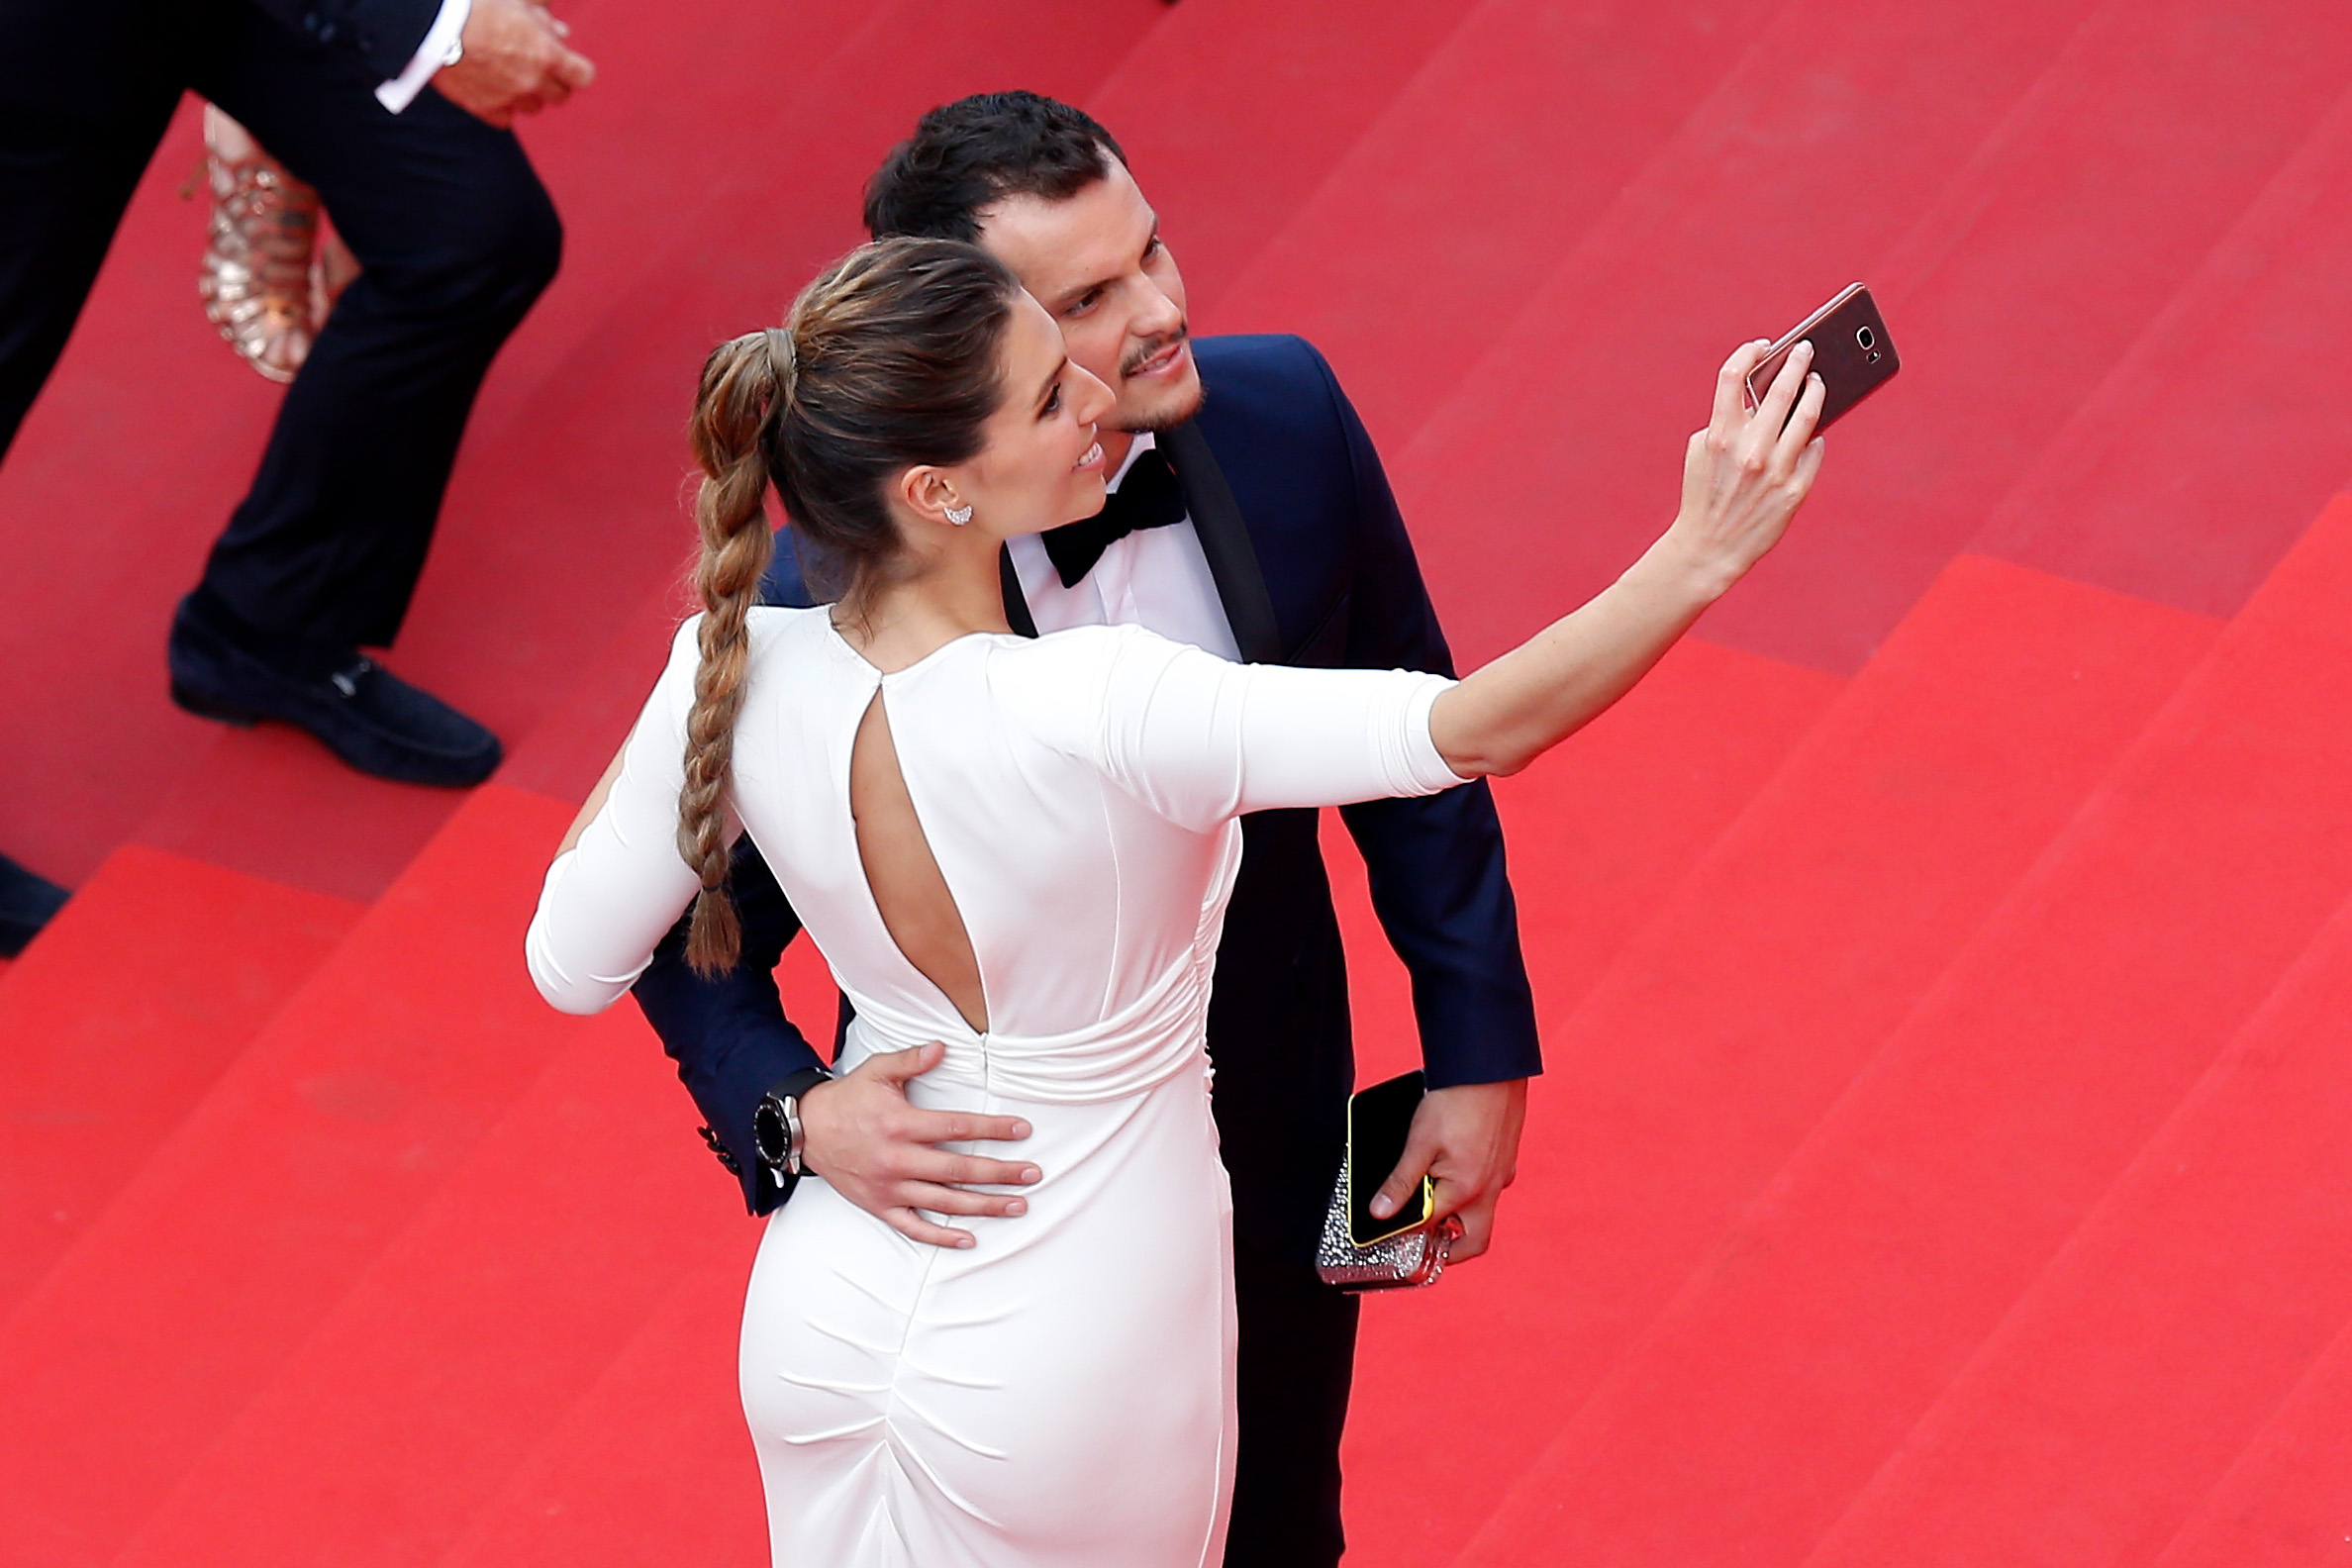 Laury Thilleman and Juan Arbelaez taking a selfie at the Cannes Film Festival in 2017 | Source: Getty Images